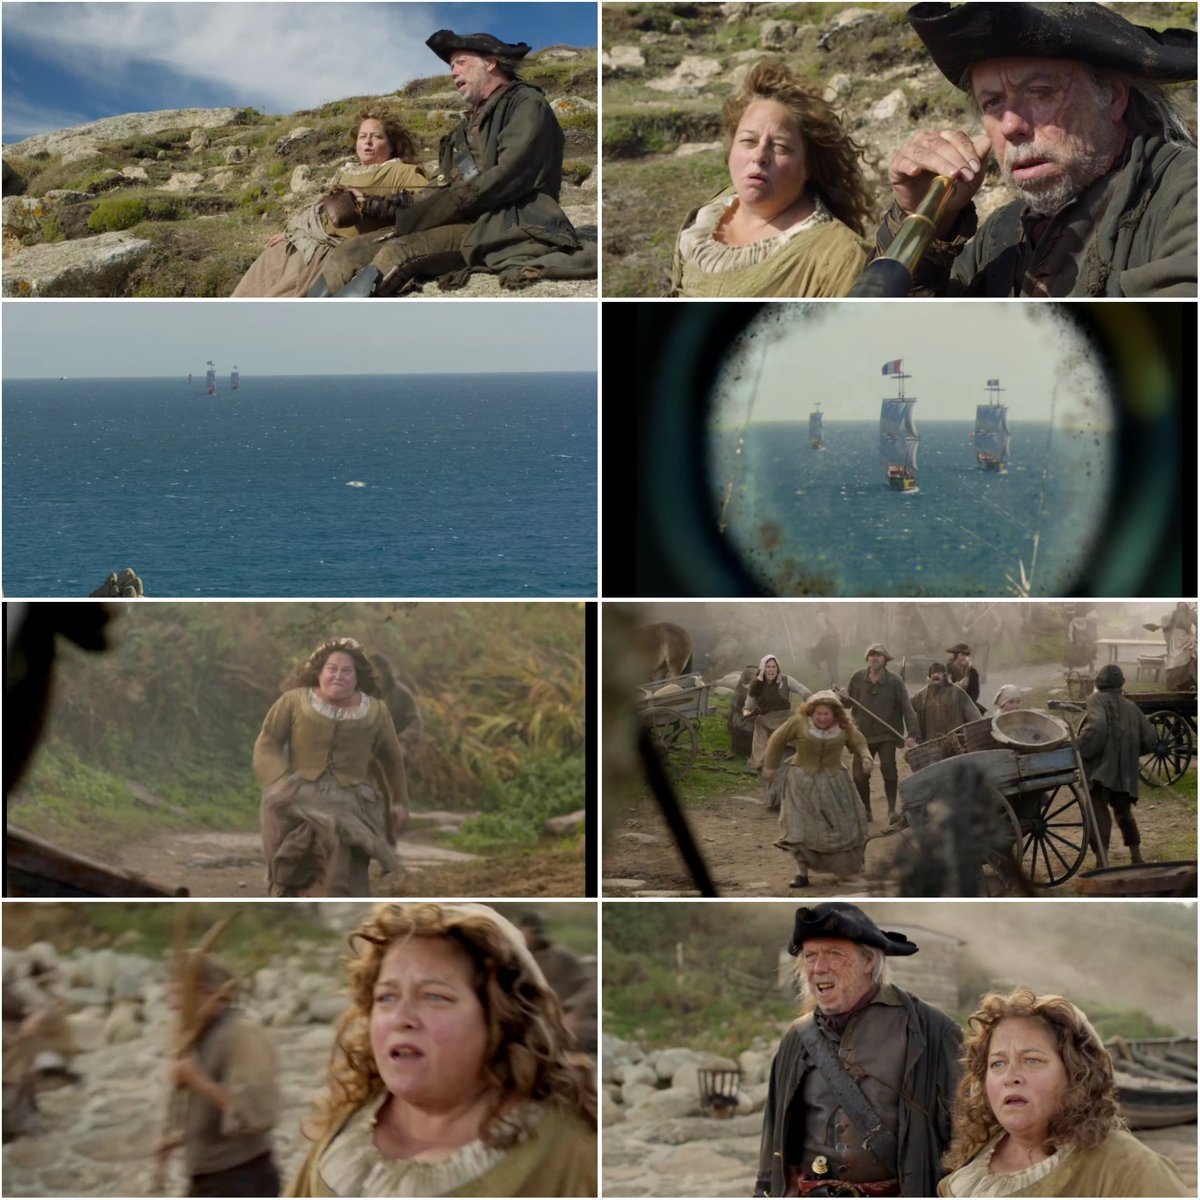 Now is the time to #bringbackPoldark #Poldark6 #Poldark Come on, @mammothscreen @masterpiecepbs @BBCOne Complete the remaining story. #AidanCrew #DebbieHorsfield #WinstonGraham @beatieedney Credit pic owner